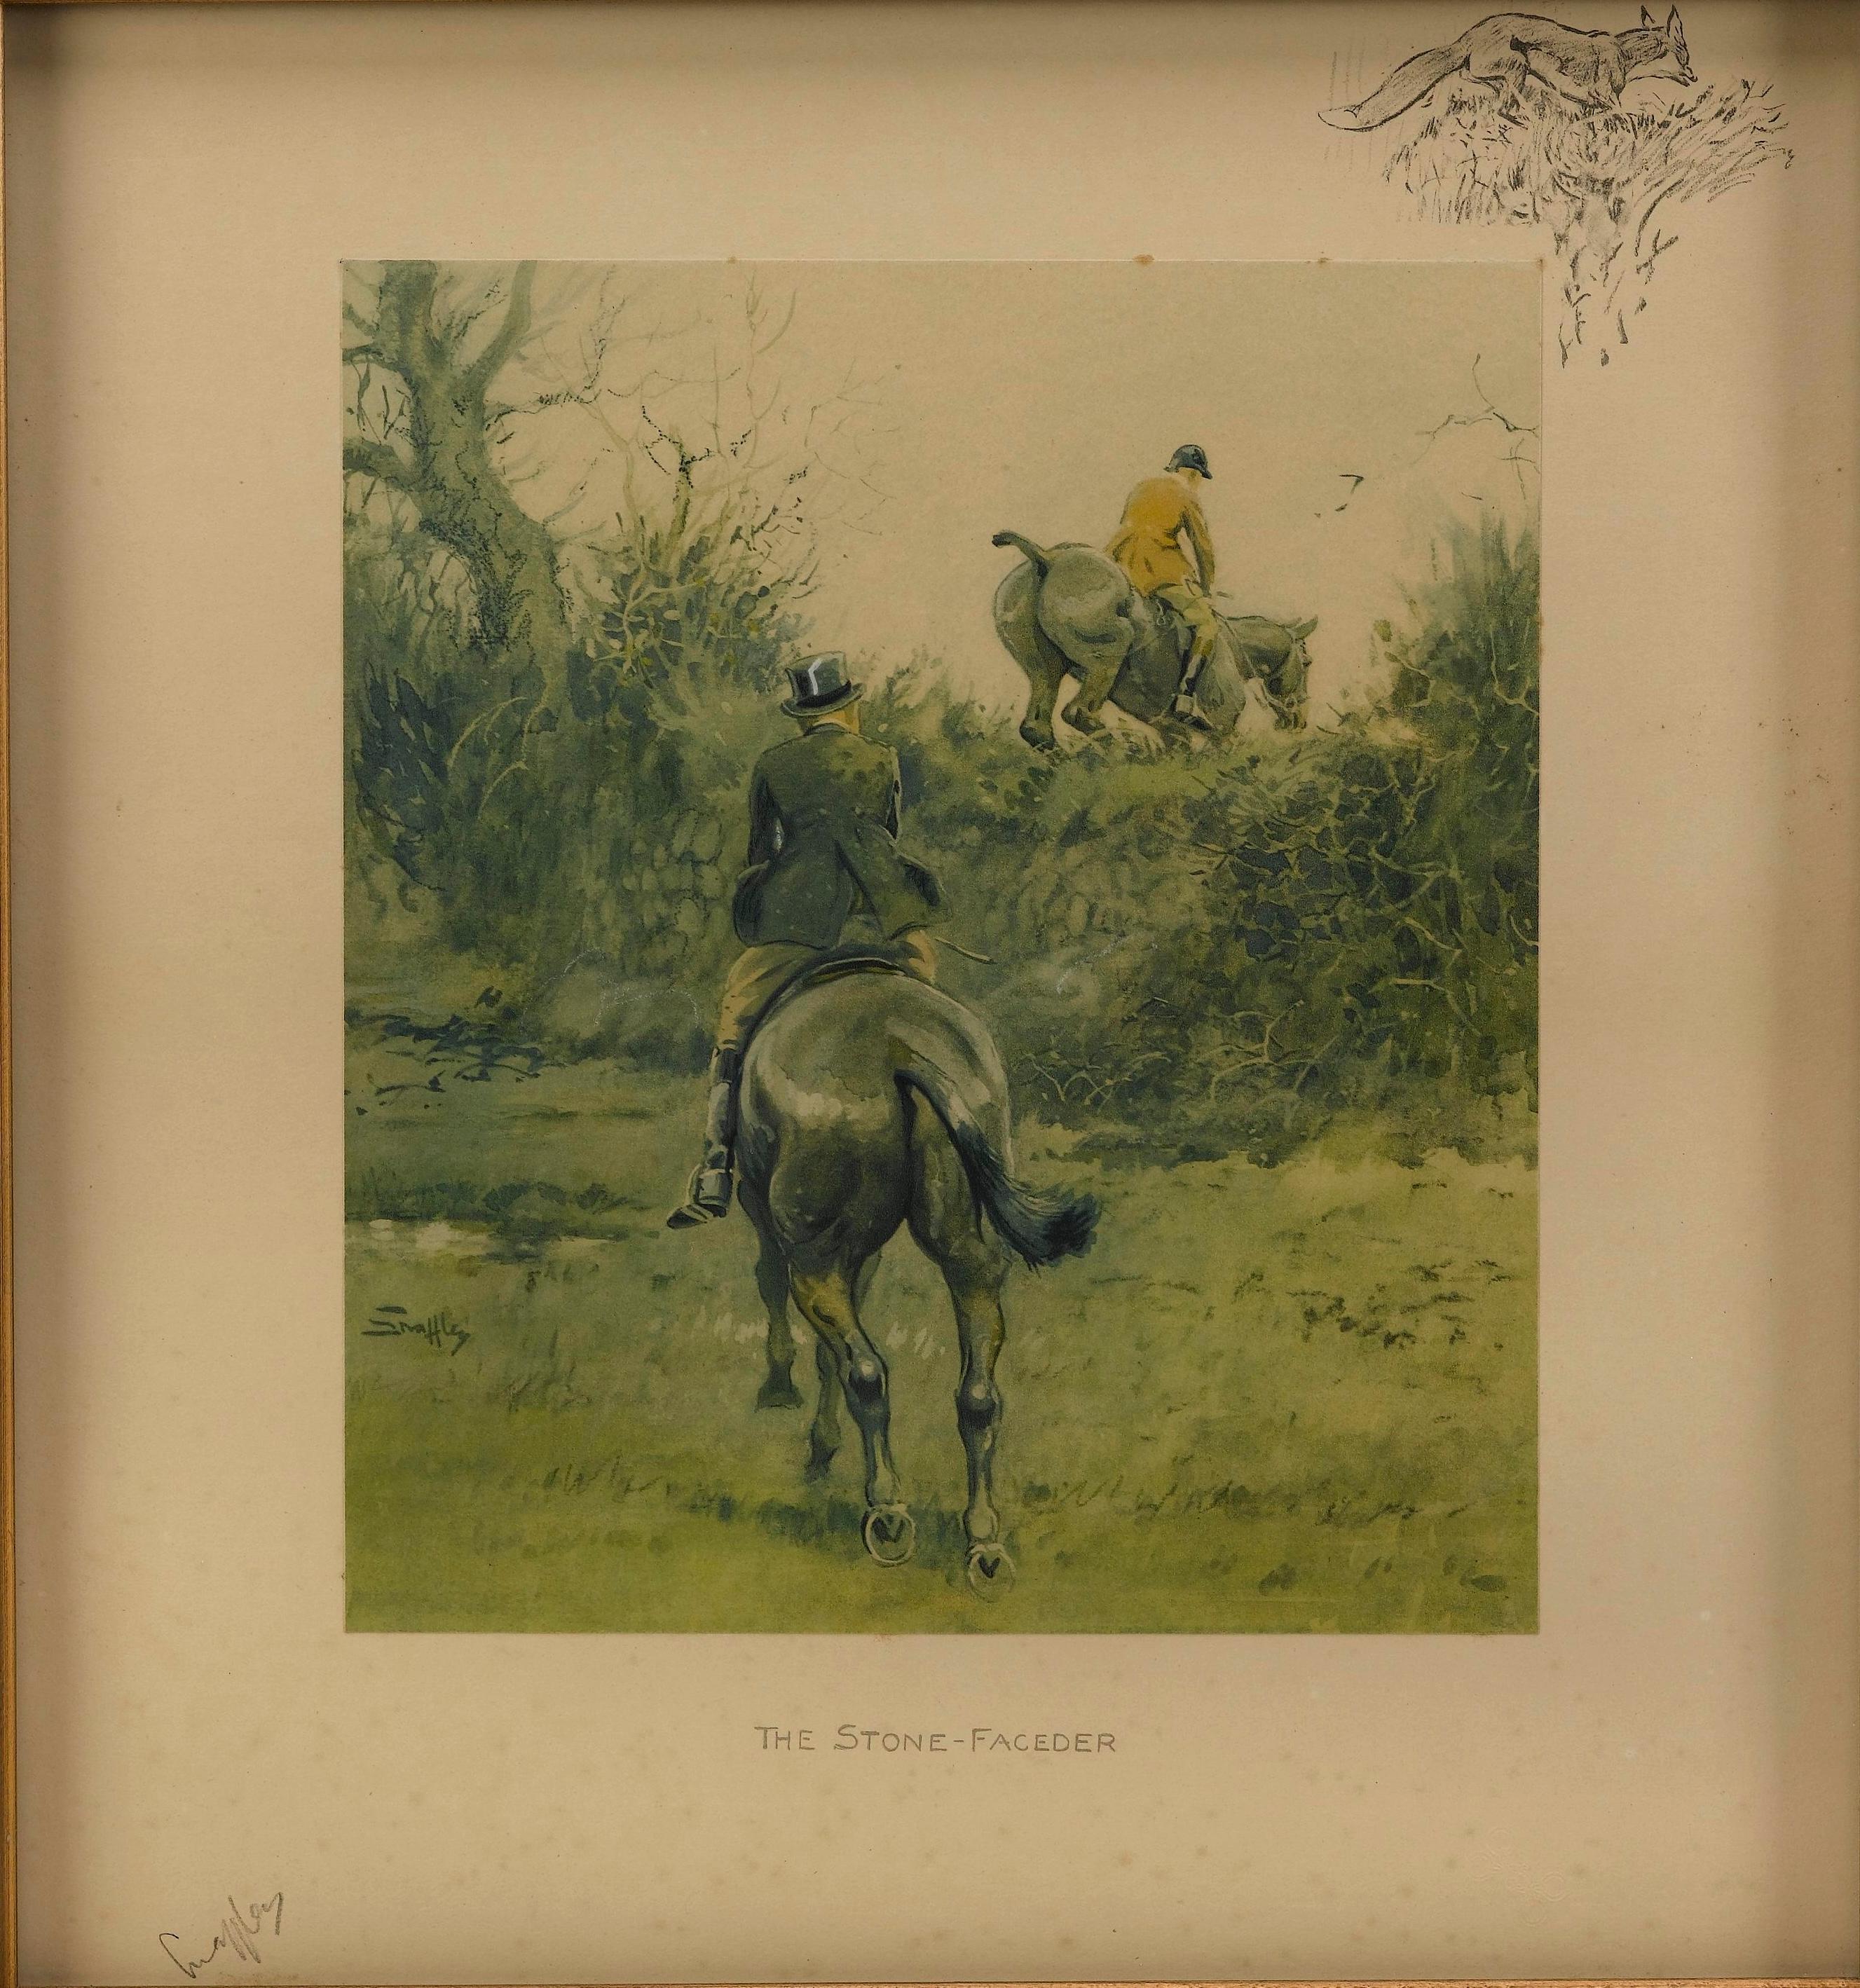 This is a hand-colored, remarked and signed Charles Johnson Payne lithographic print, entitle: The Stone Faceder. The border area of the art is sign by the artist using his known pseudonym - Snaffles. The print depicts equestrian style riding in the